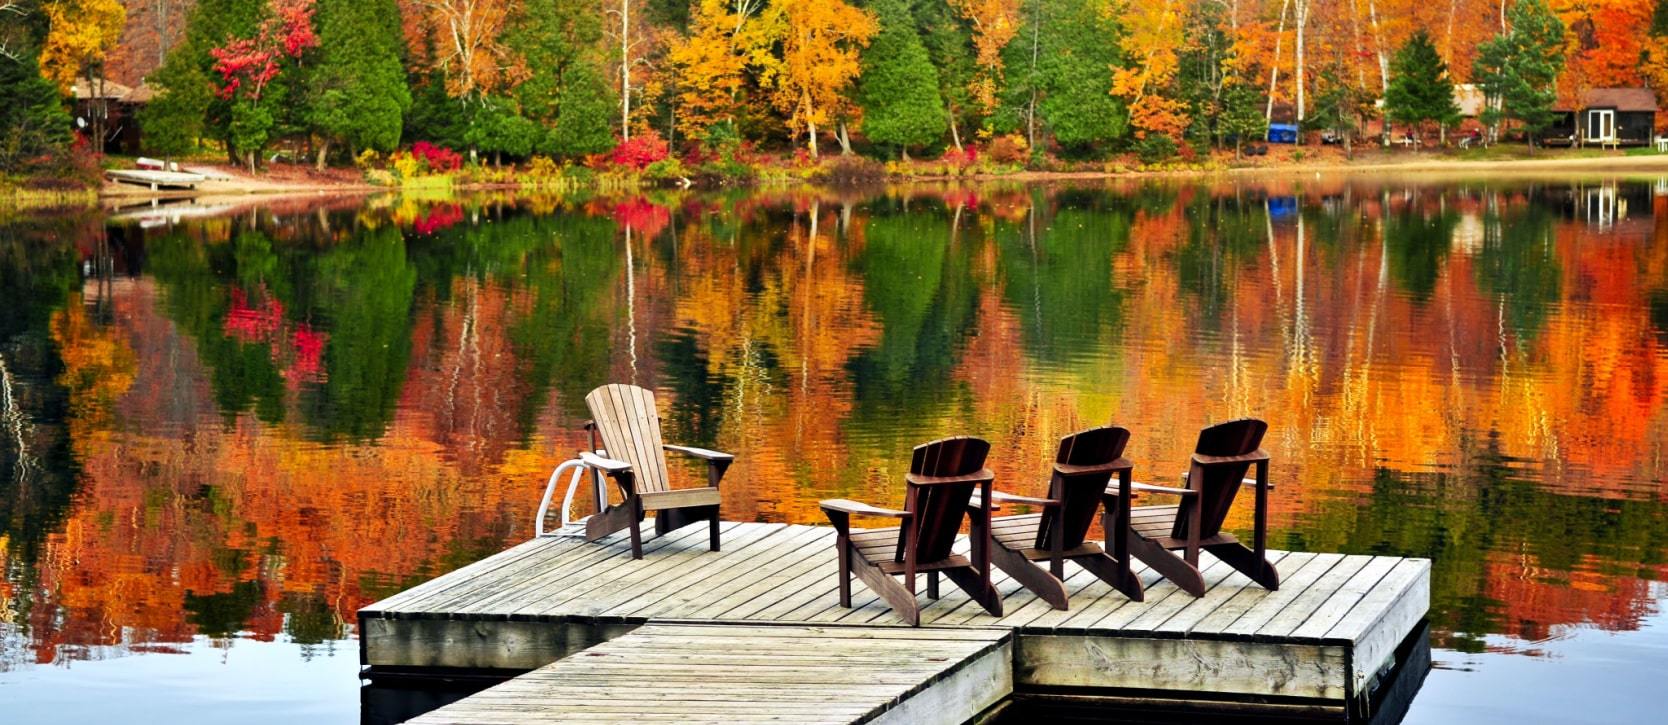 Lounge chairs on a dock in the fall in Muskoka